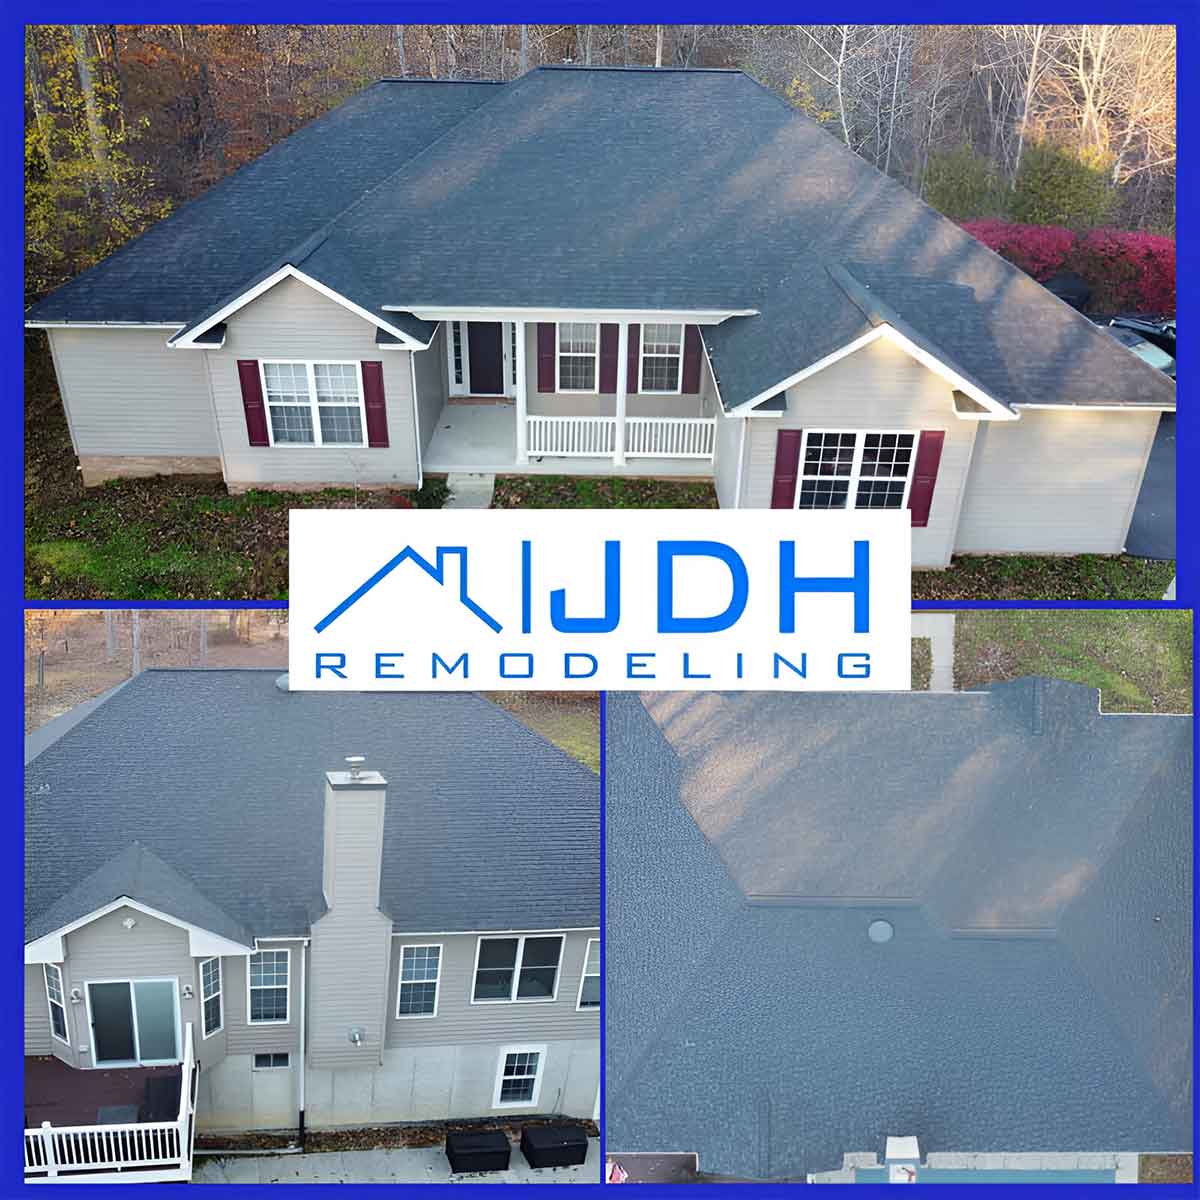 JDH Remodeling - Roofing Contractors